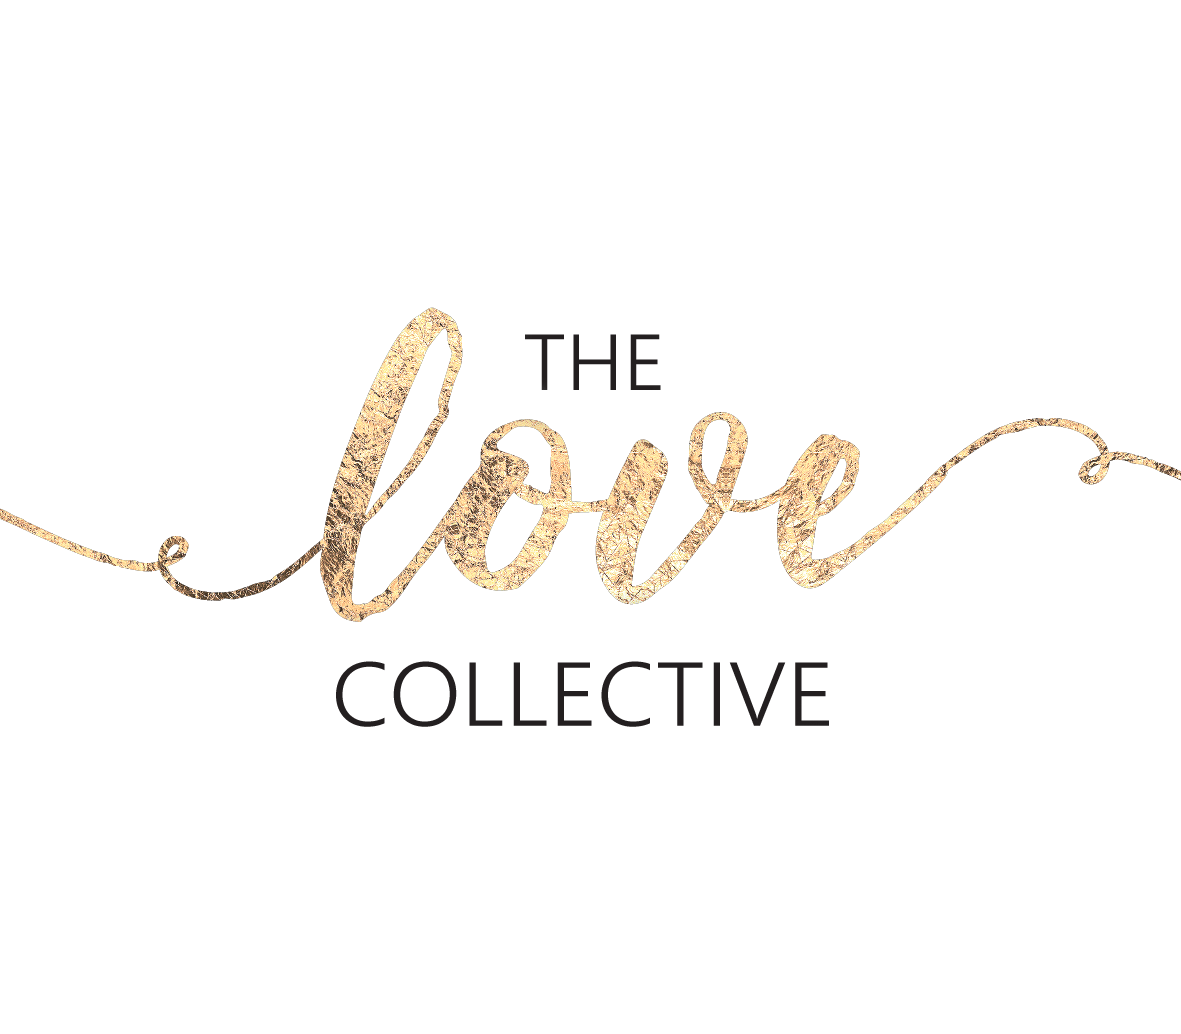 Wedding Photographers - The Love Collective